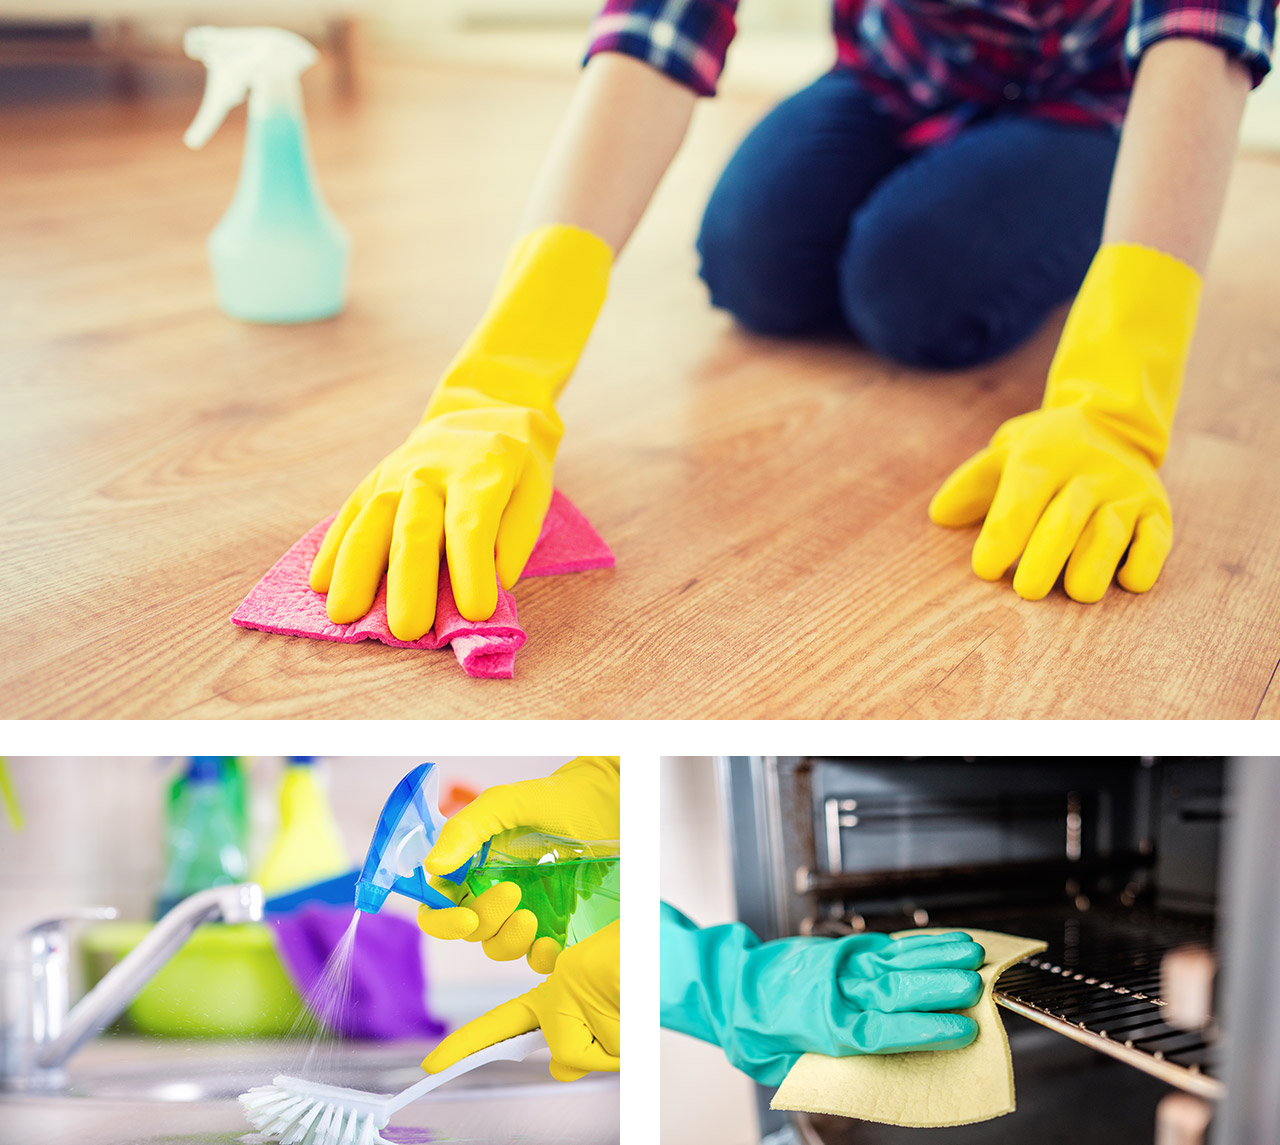 6-things-home-cleaners-want-you-to-know-content